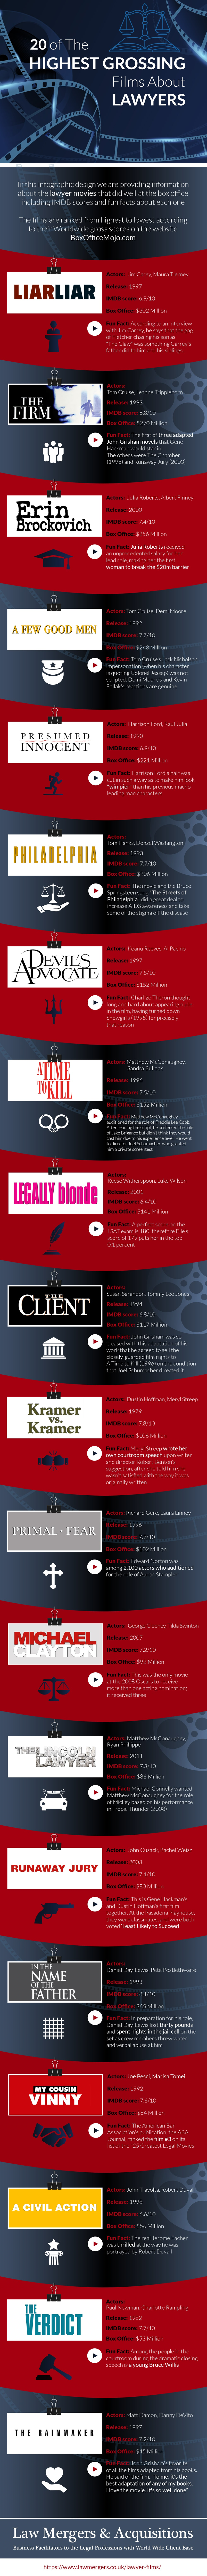 20 Of The Highest Grossing Films About Lawyers - Infographic